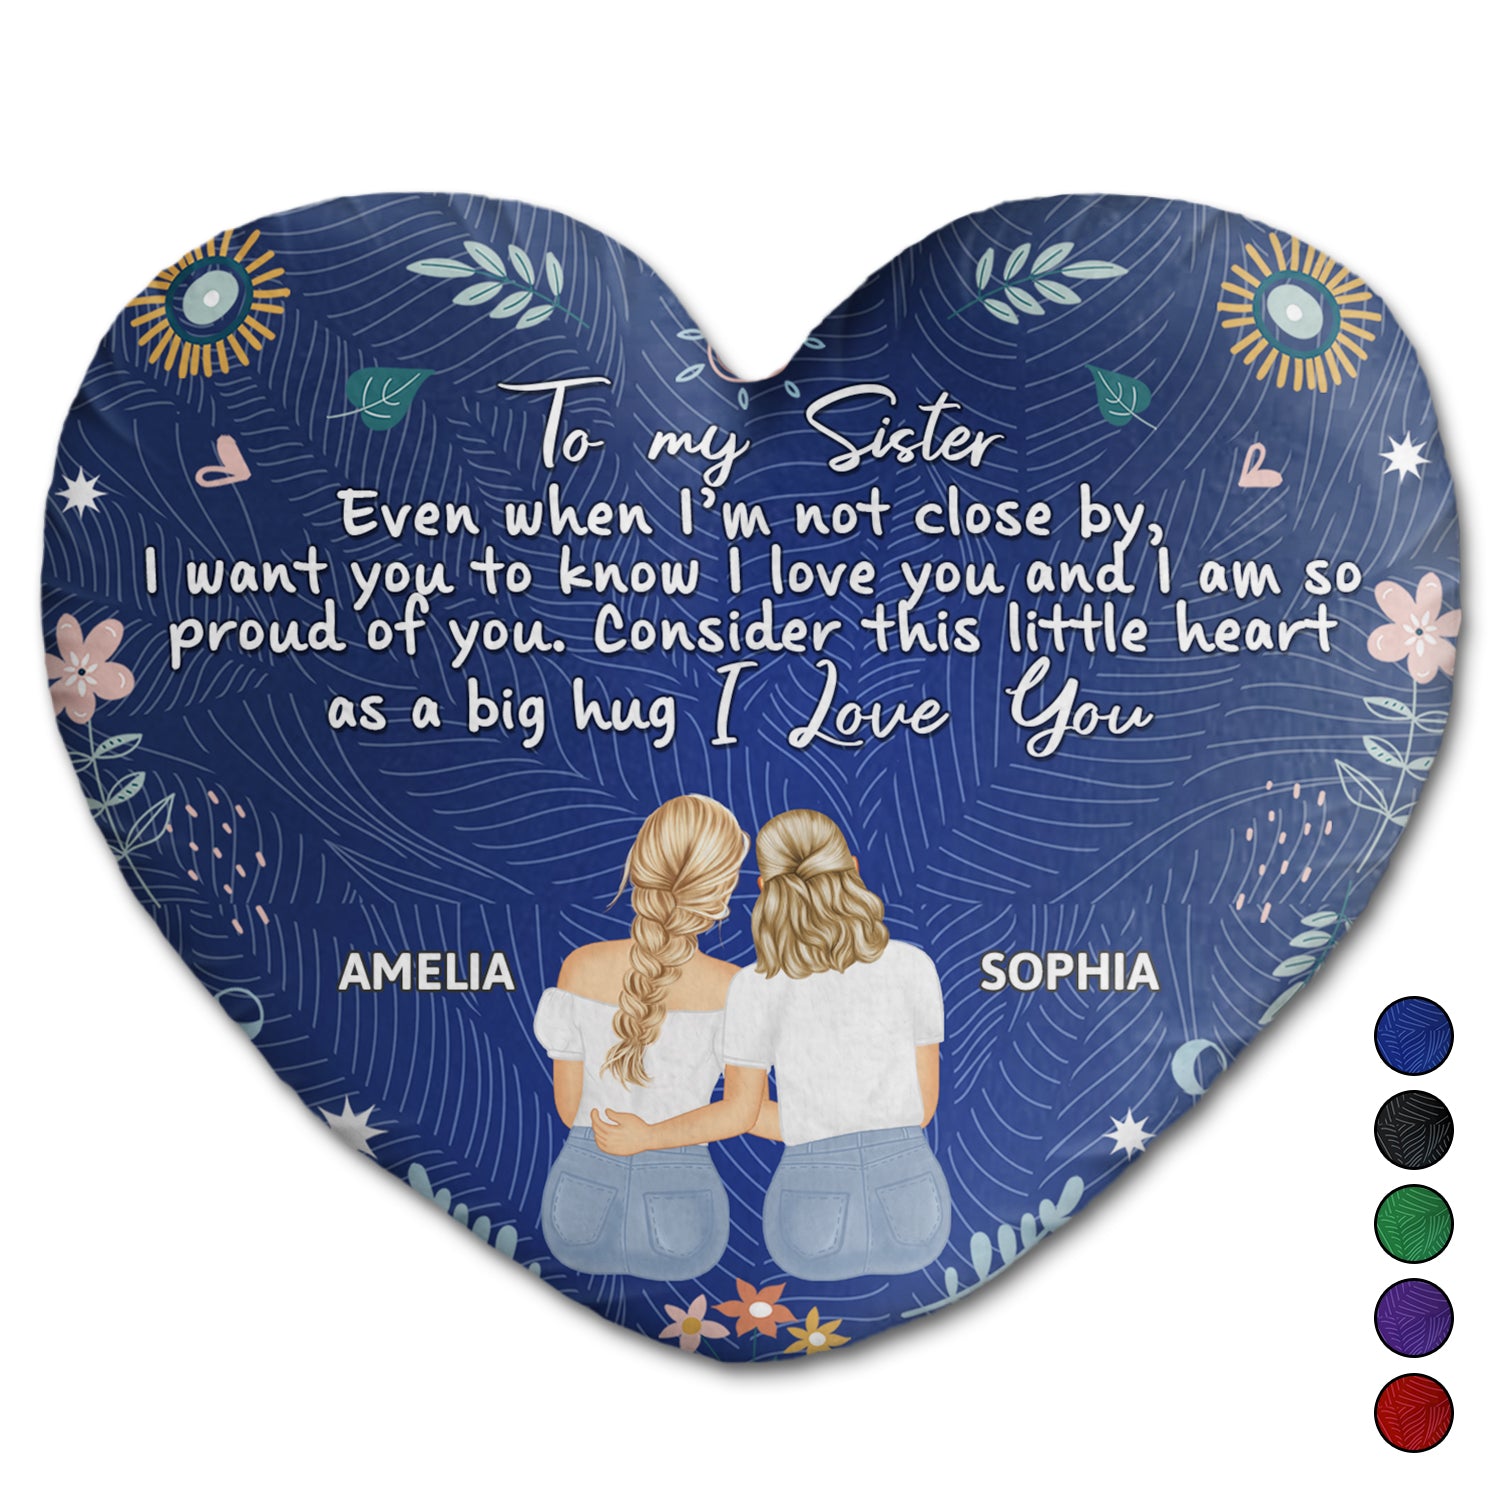 Even When I'm Not Close By - Gift For Sisters, Besties, Daughters - Personalized Heart Shaped Pillow